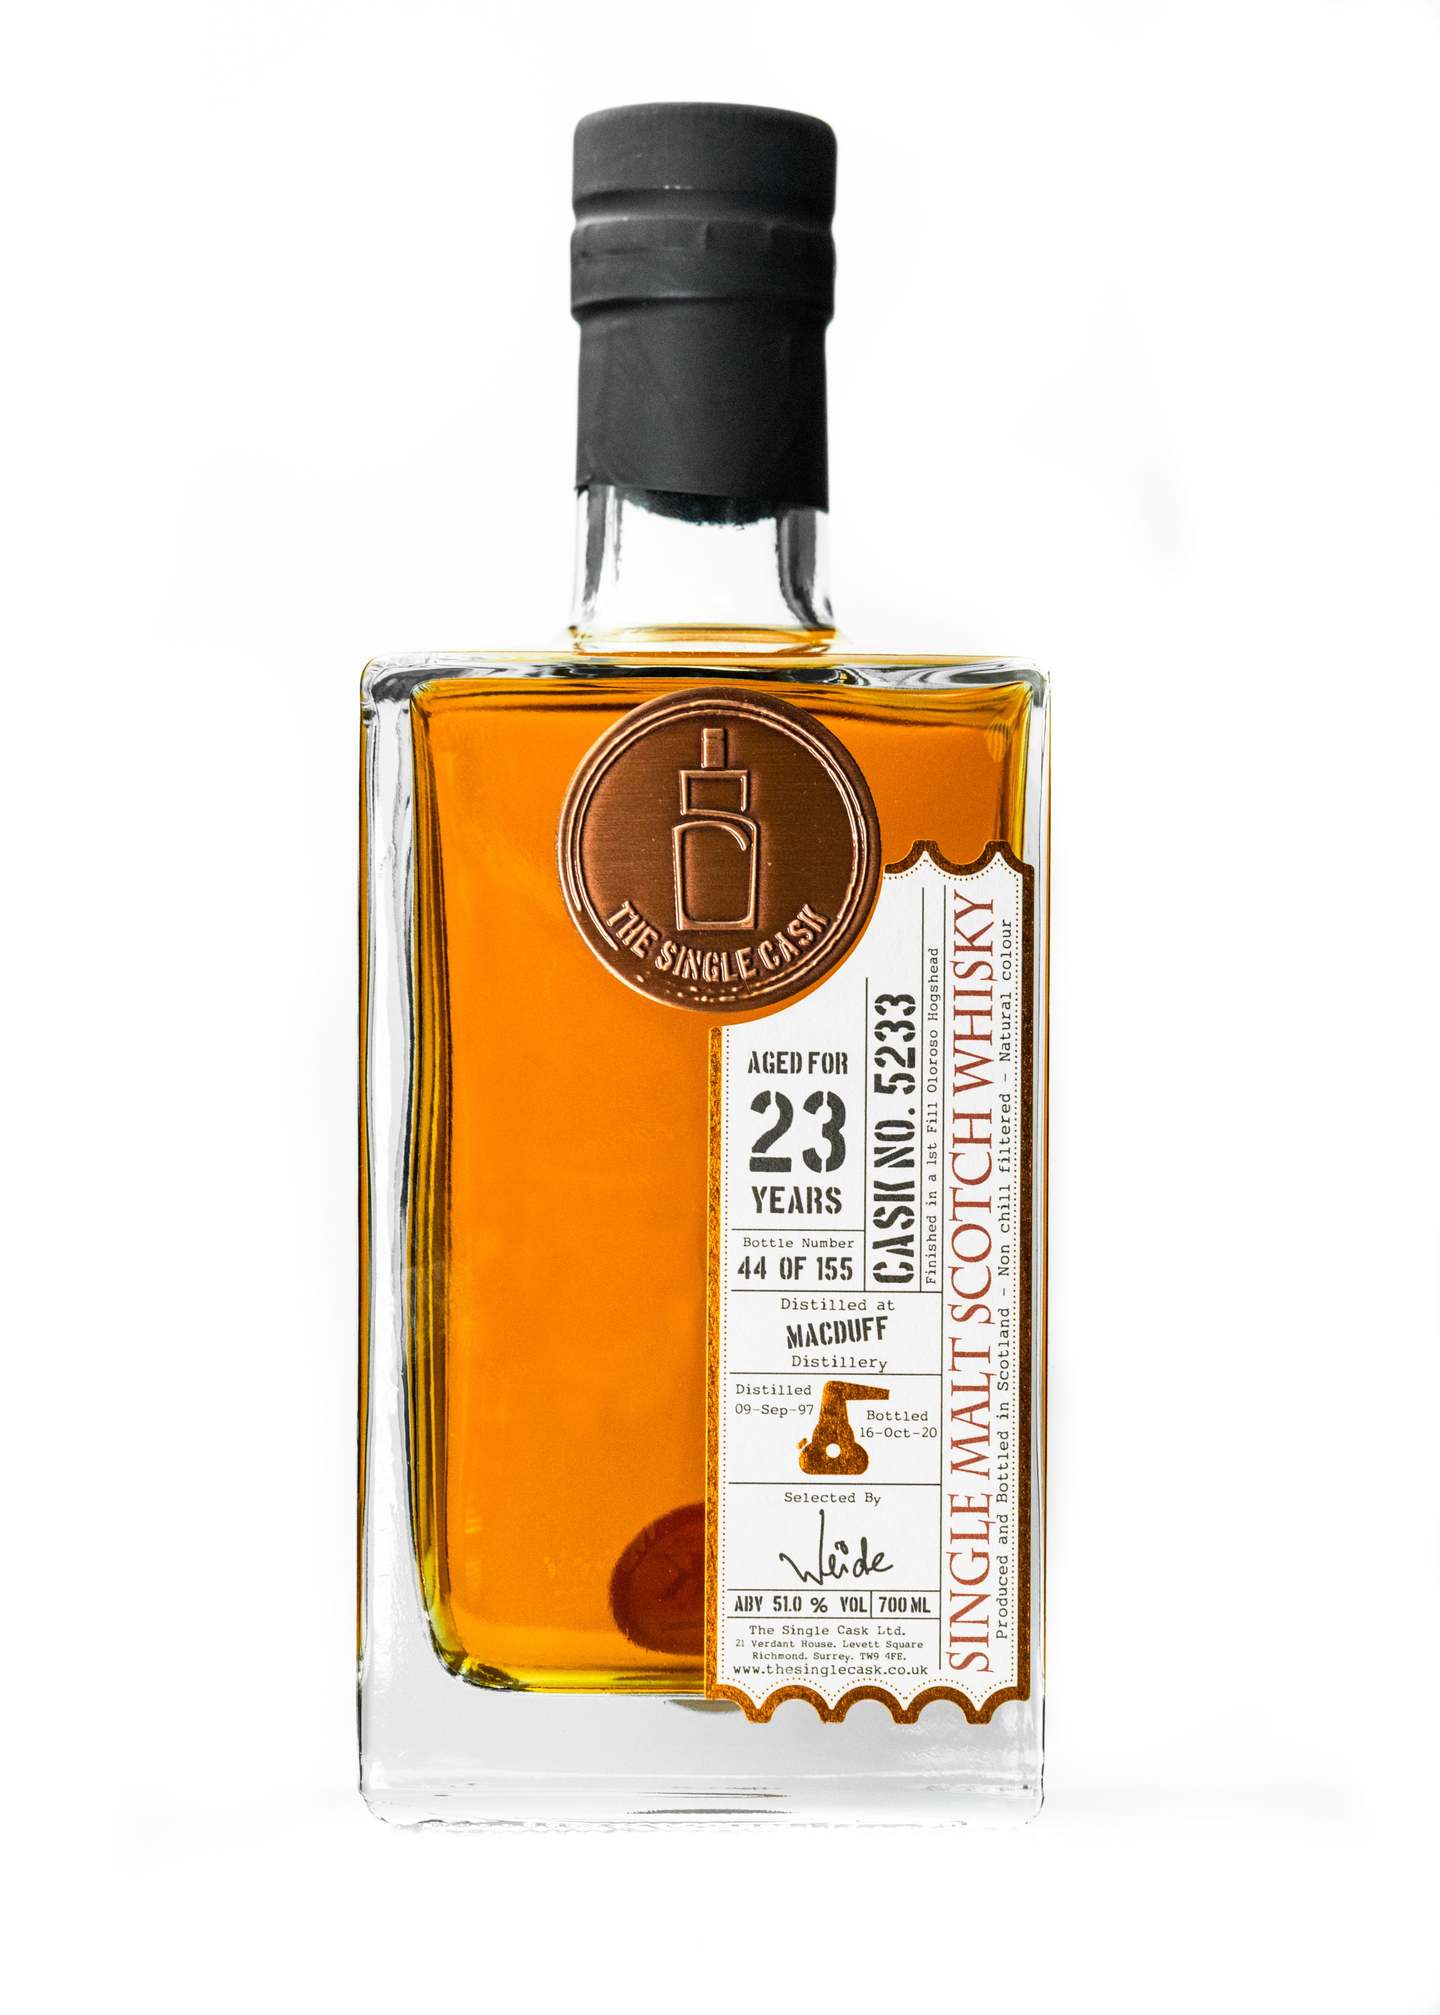 23 years old Macduff scotch whisky by the single cask independent bottler